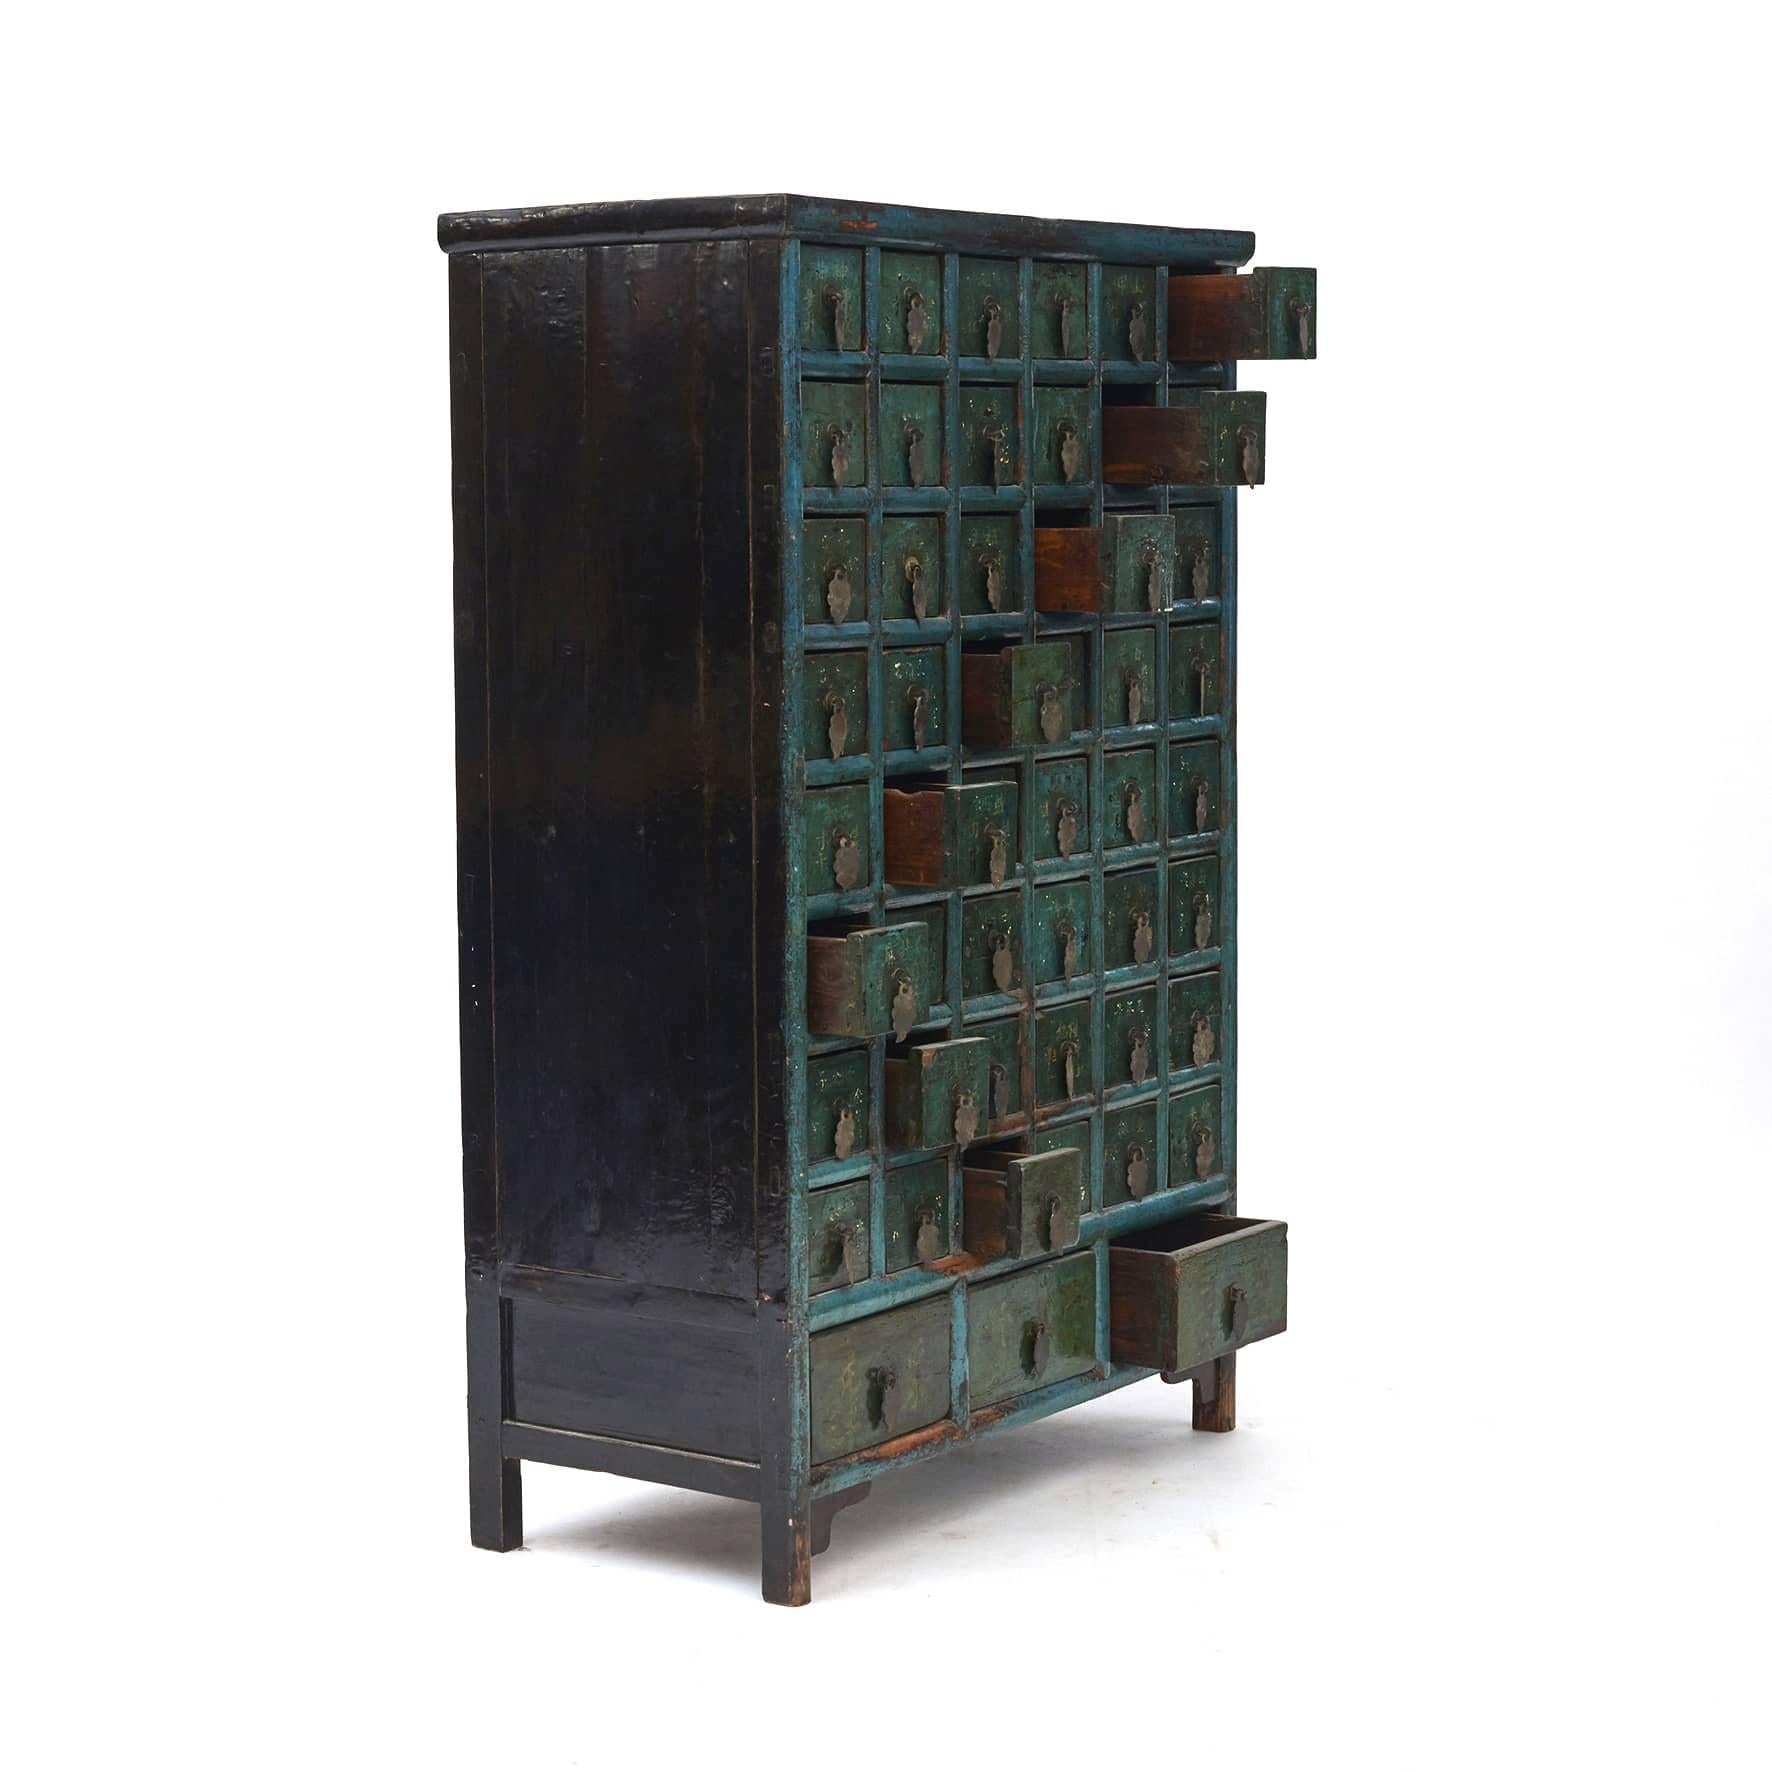 Lacquered Mid 19th Century Chinese Apothecary Medicine Chest with 51 Drawers